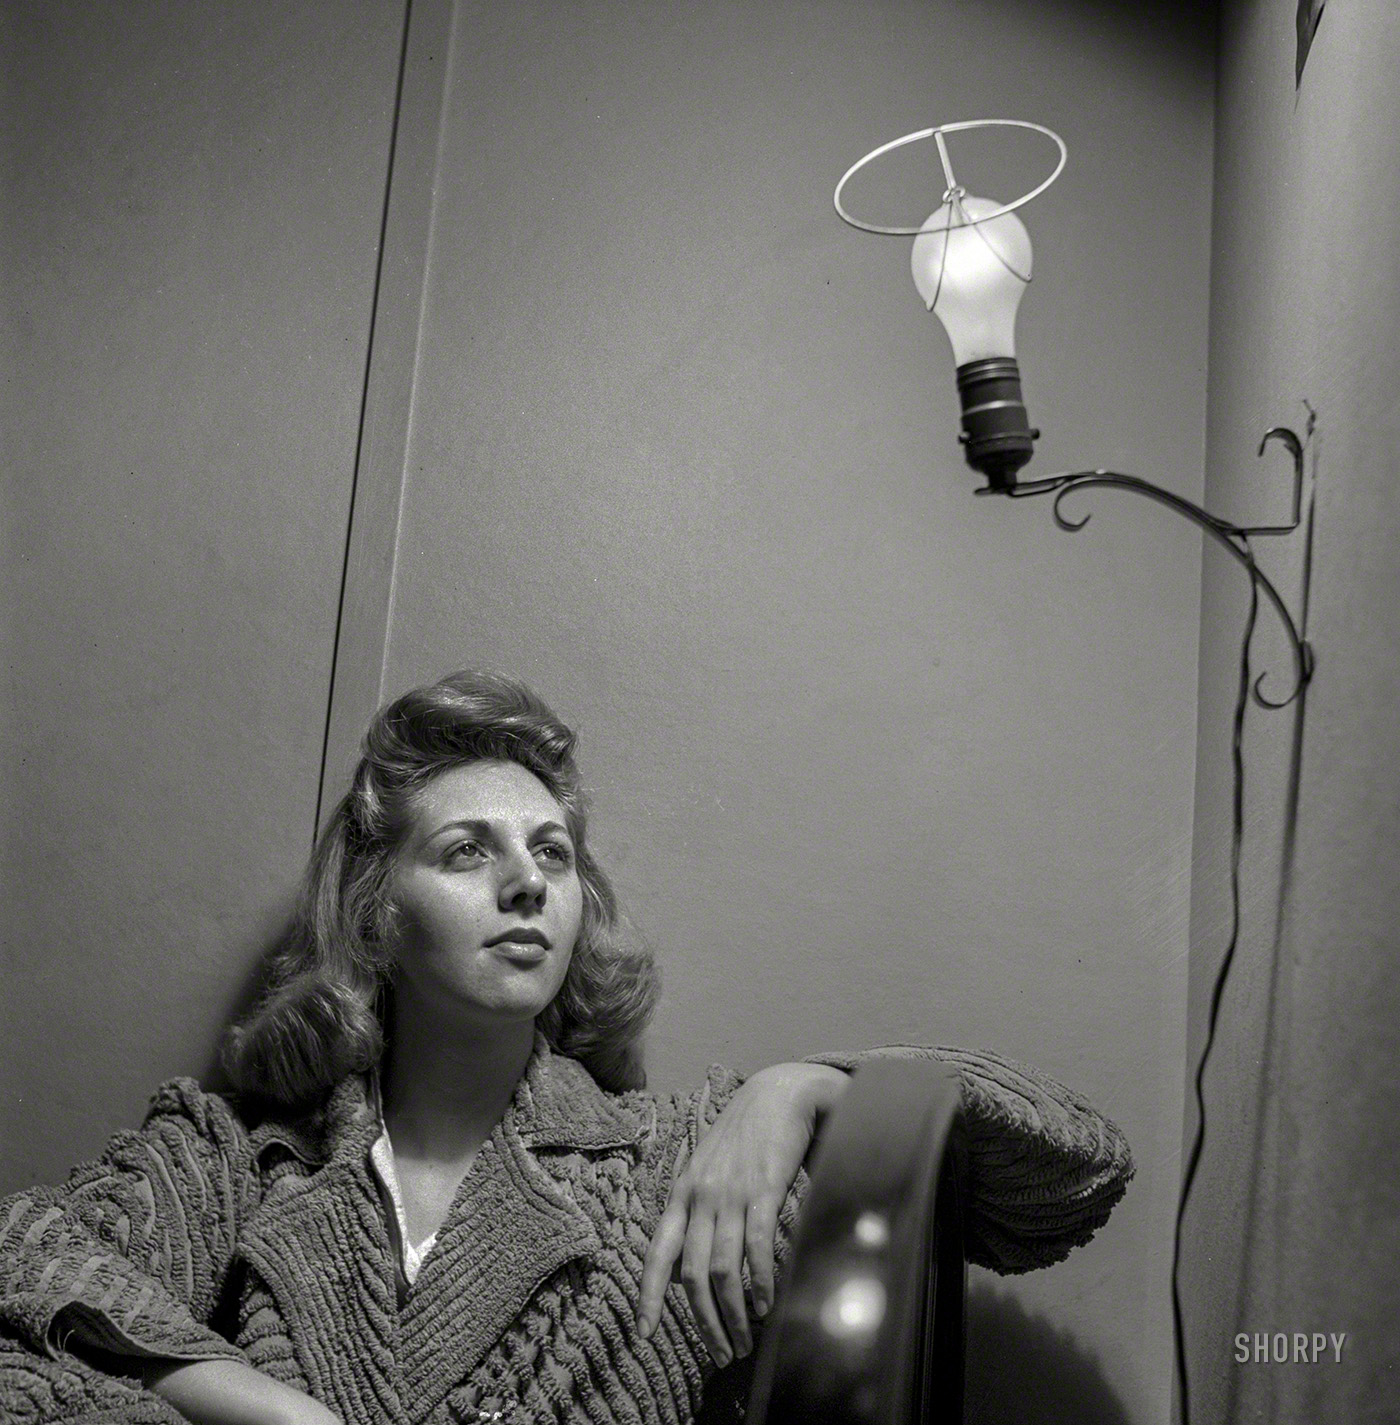 January 1943. Washington, D.C. "This Office of Price Administration clerk, speaking of her boardinghouse room, says: 'The light looks like an angel when I leave the shade off, so I do so'." Photo by Esther Bubley. View full size.